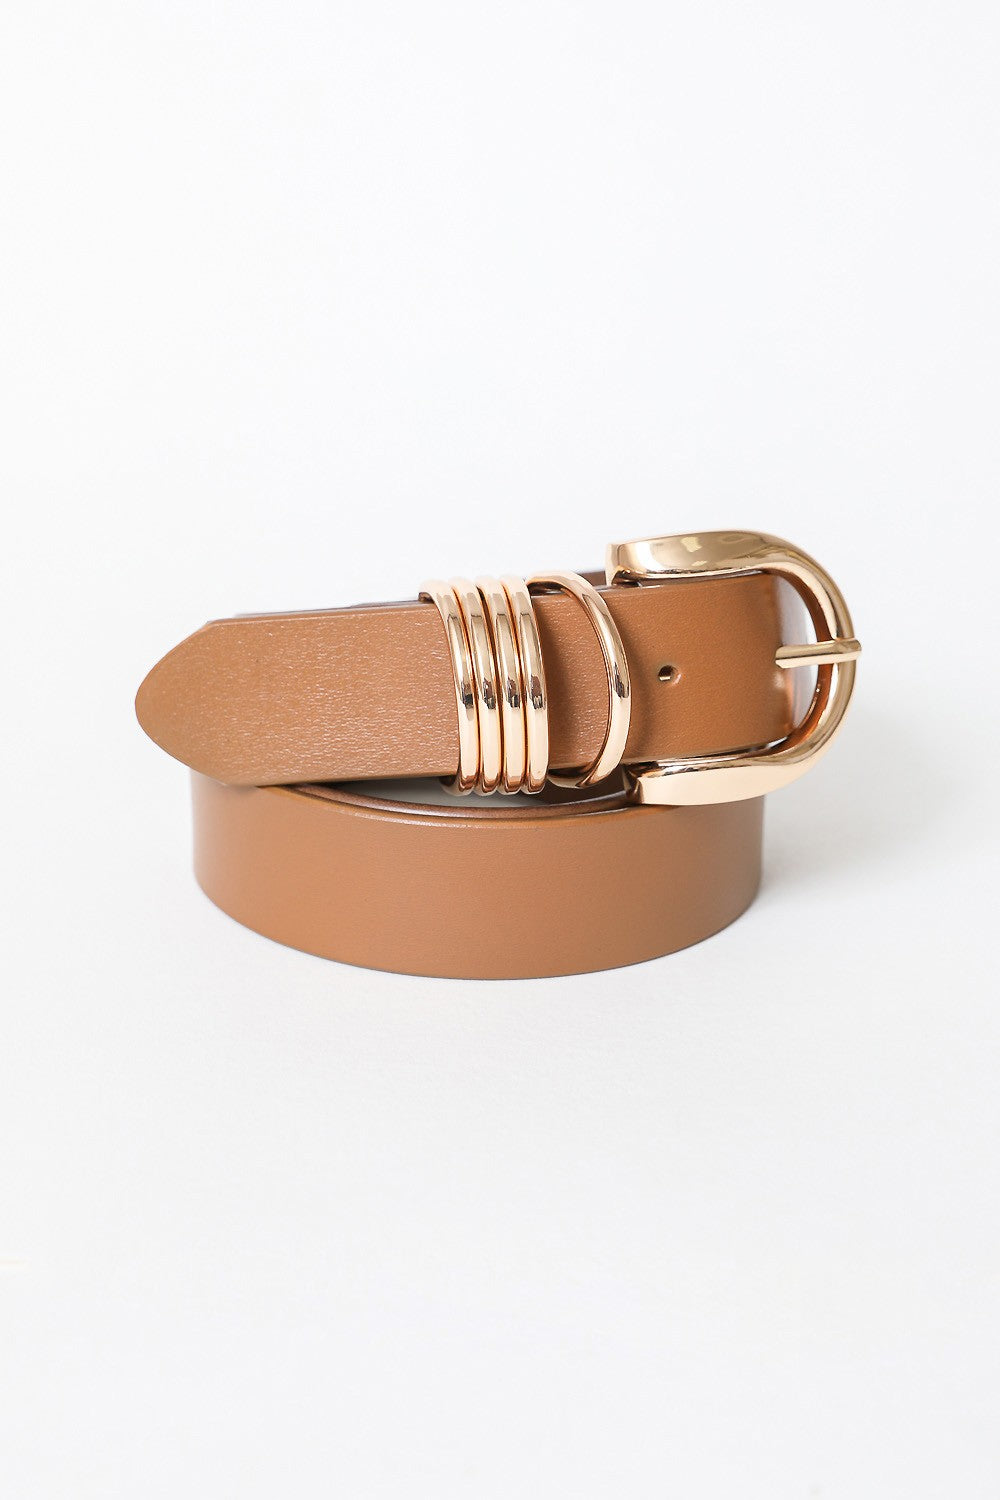 Ring It In Multi Accent Gold Ring Belt - Taupe